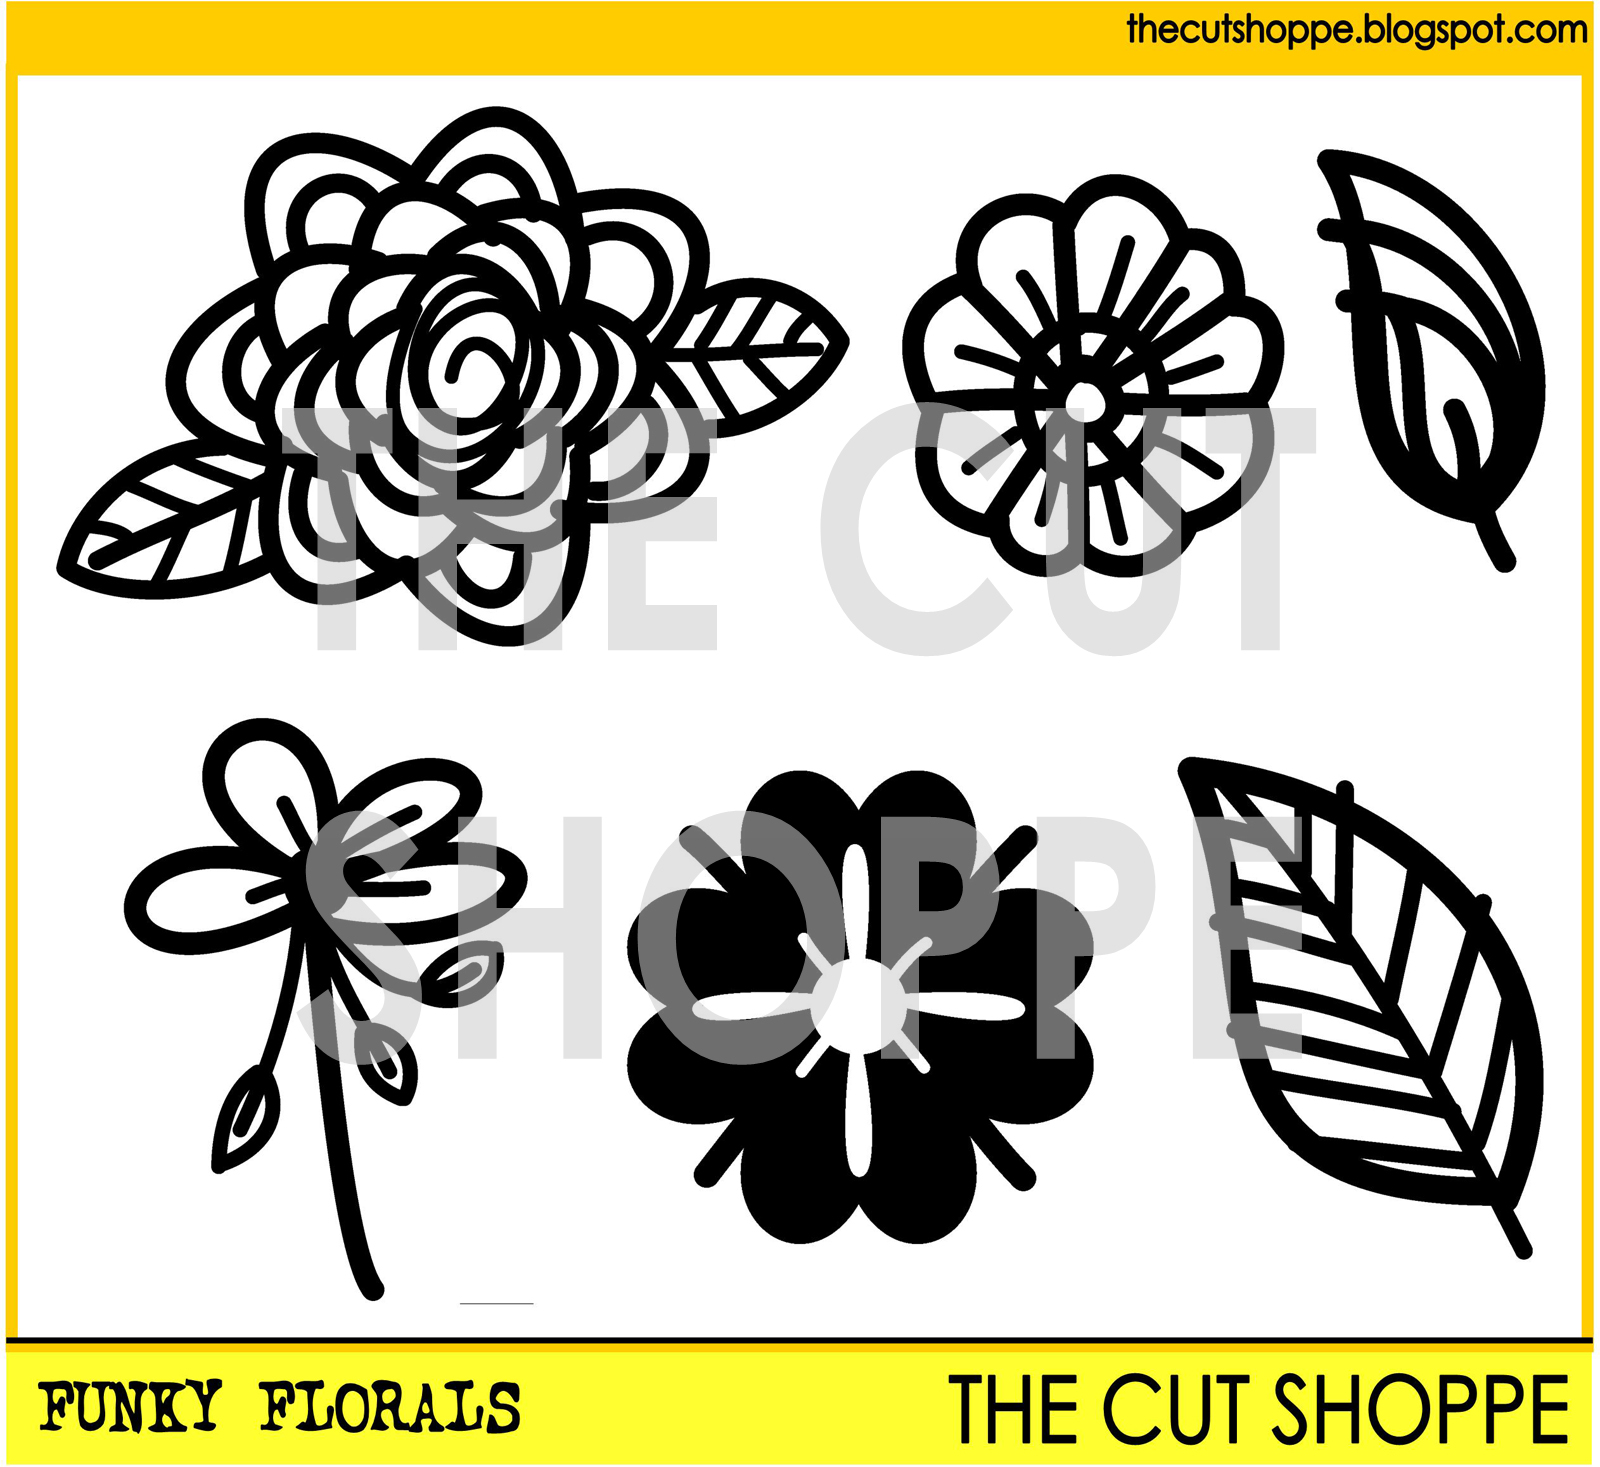 https://www.etsy.com/listing/201447417/the-funky-florals-cut-file-includes-4?ref=shop_home_active_4